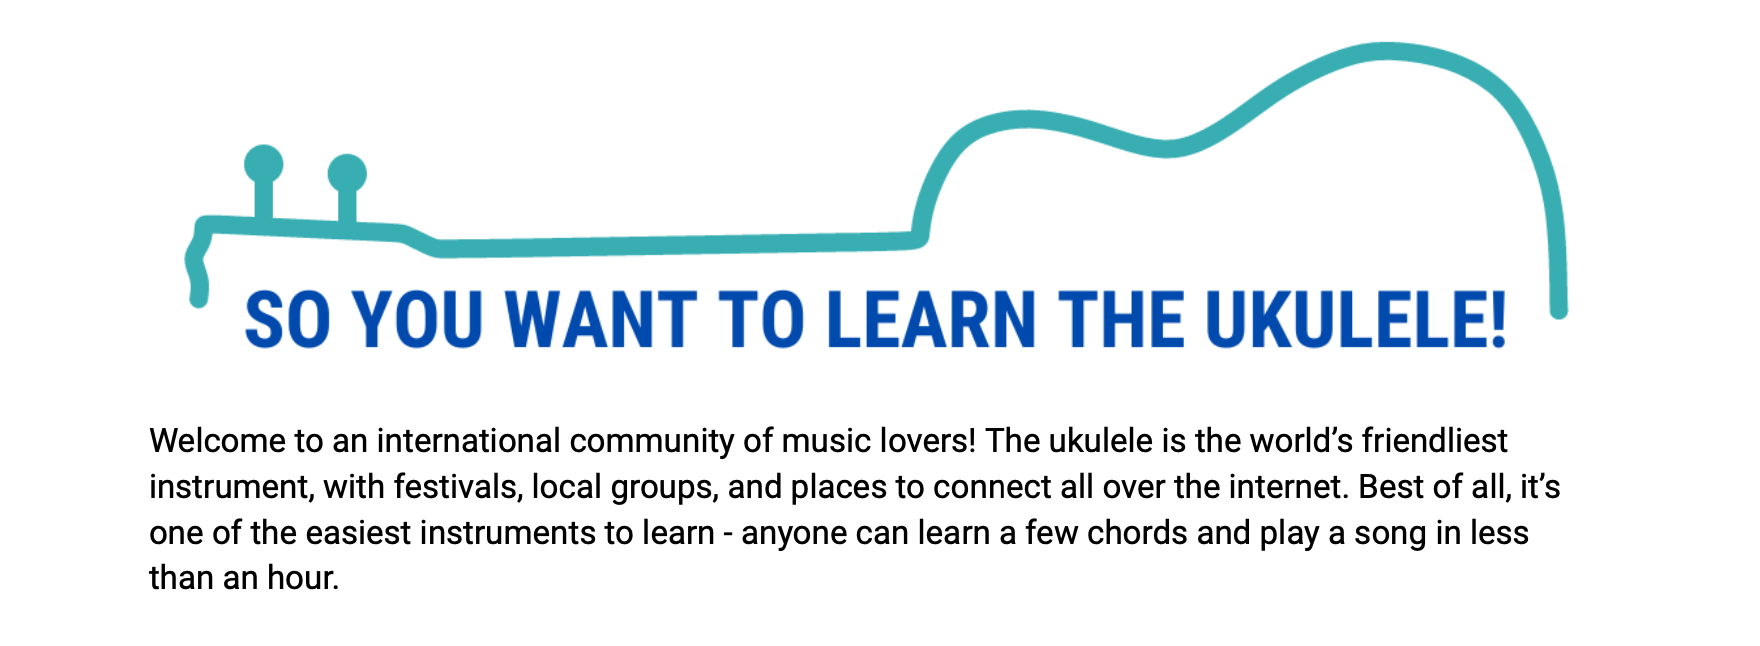 So You Want to Learn the Ukulele!